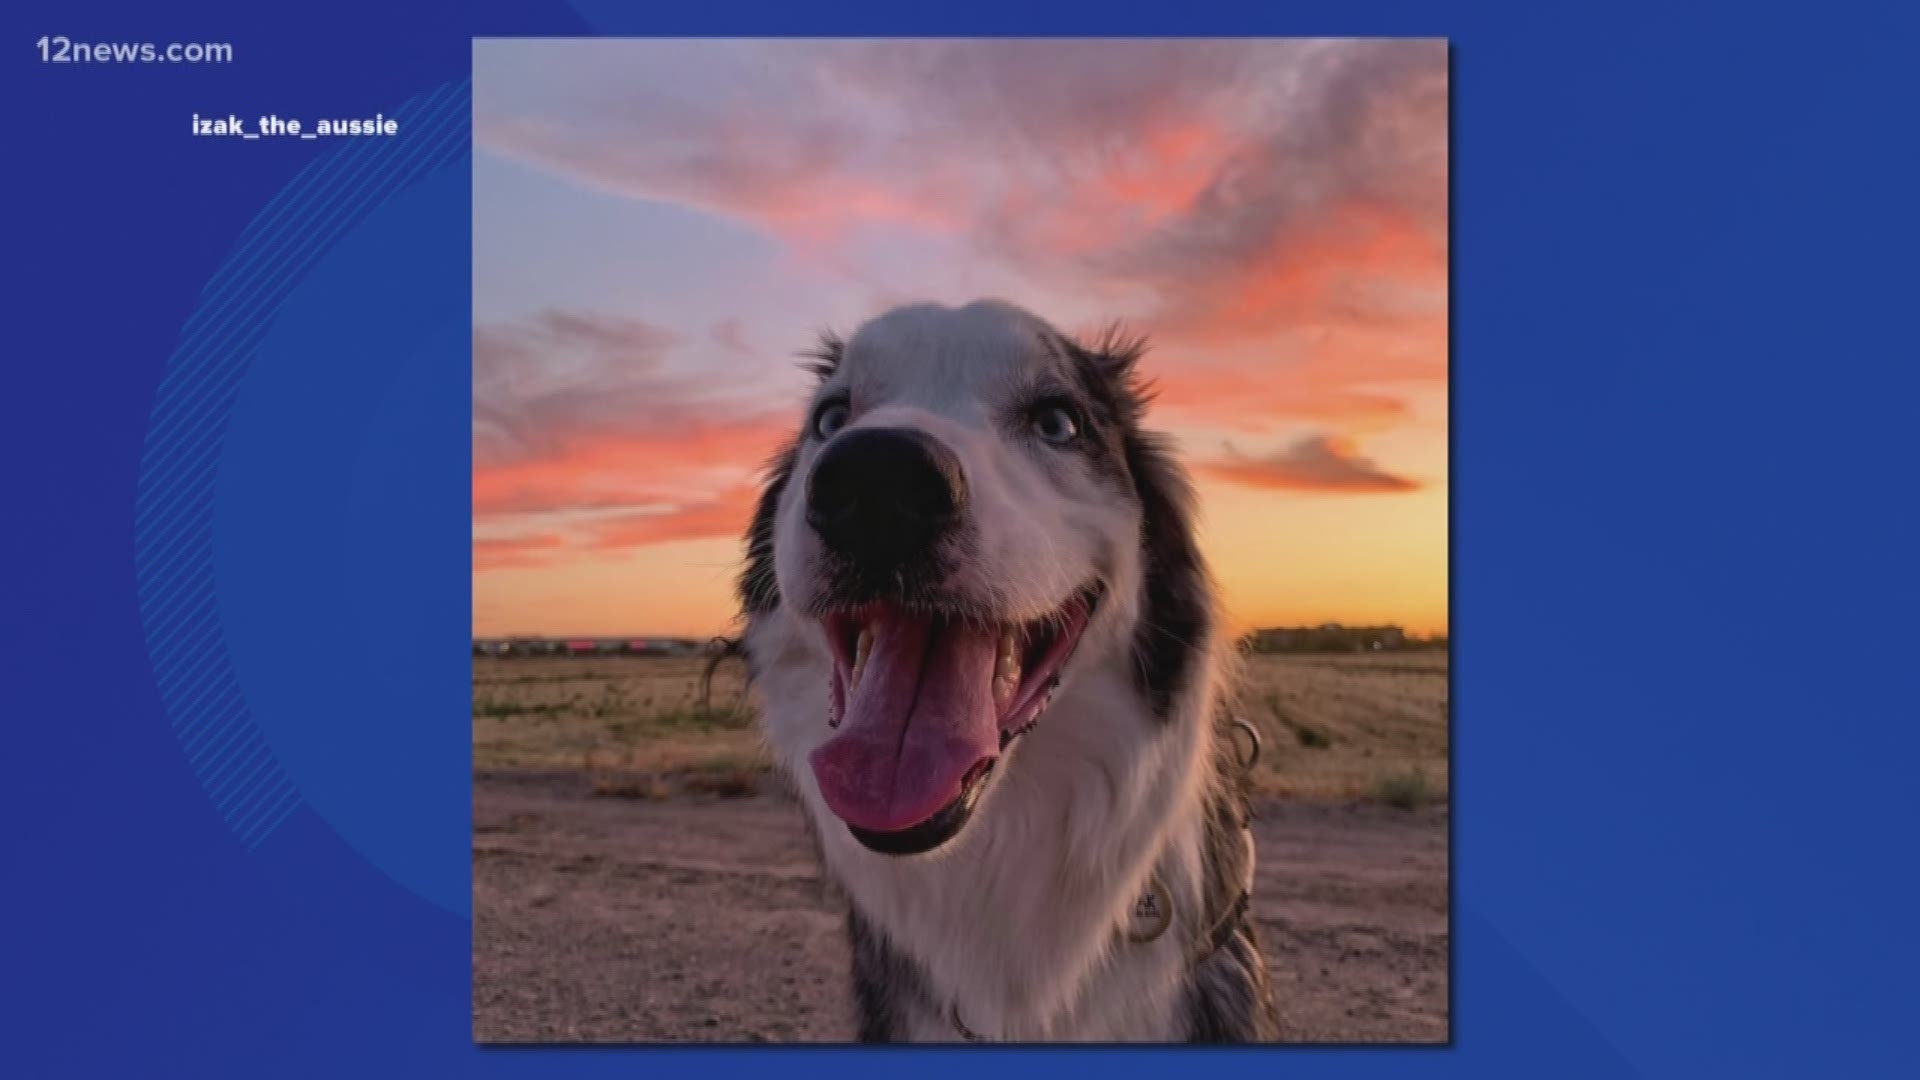 Even our furry friends can't help but smile at the beautiful Arizona skies.